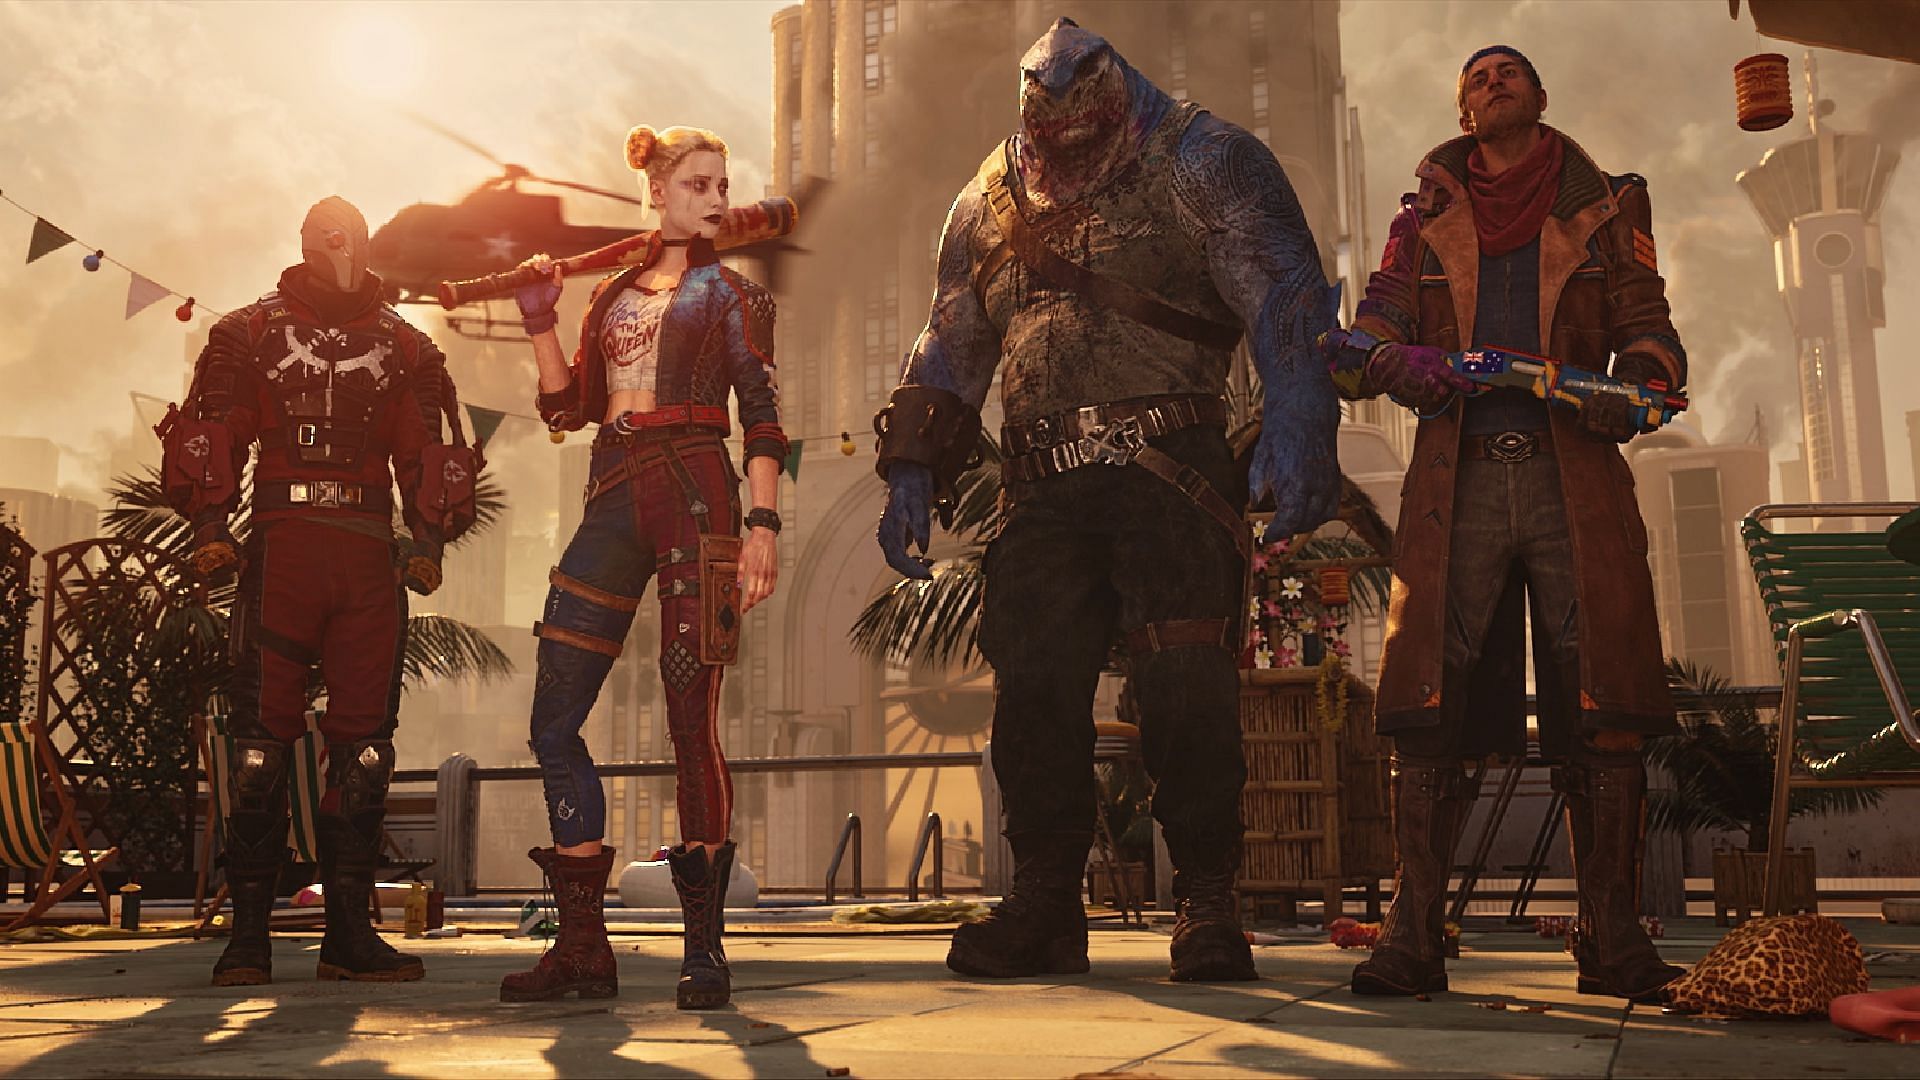 The cast of playable characters (Image via Rocksteady)